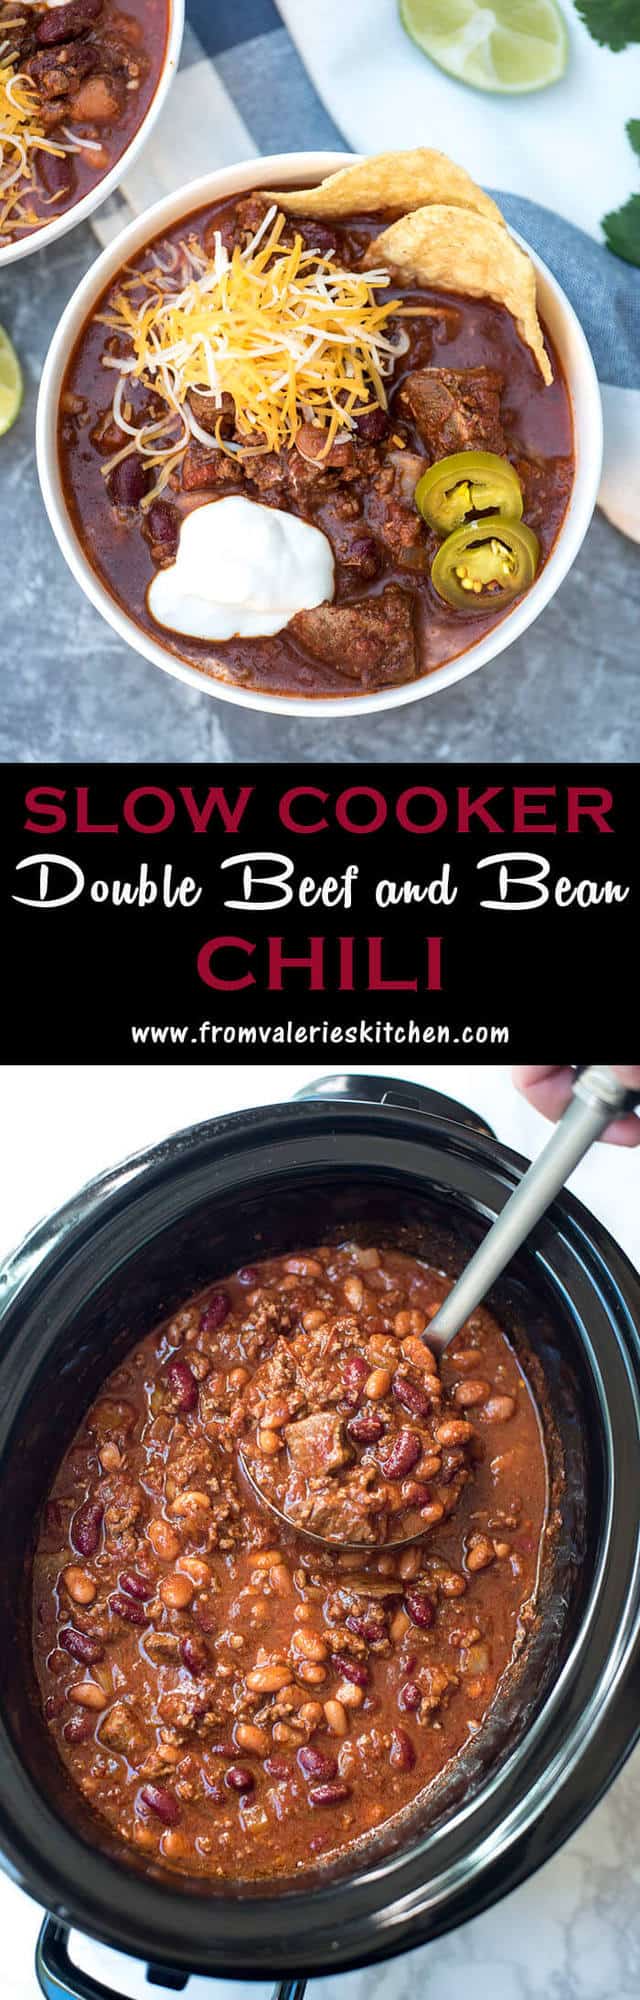 Two images of Slow Cooker Double Beef and Bean Chili with text overlay.